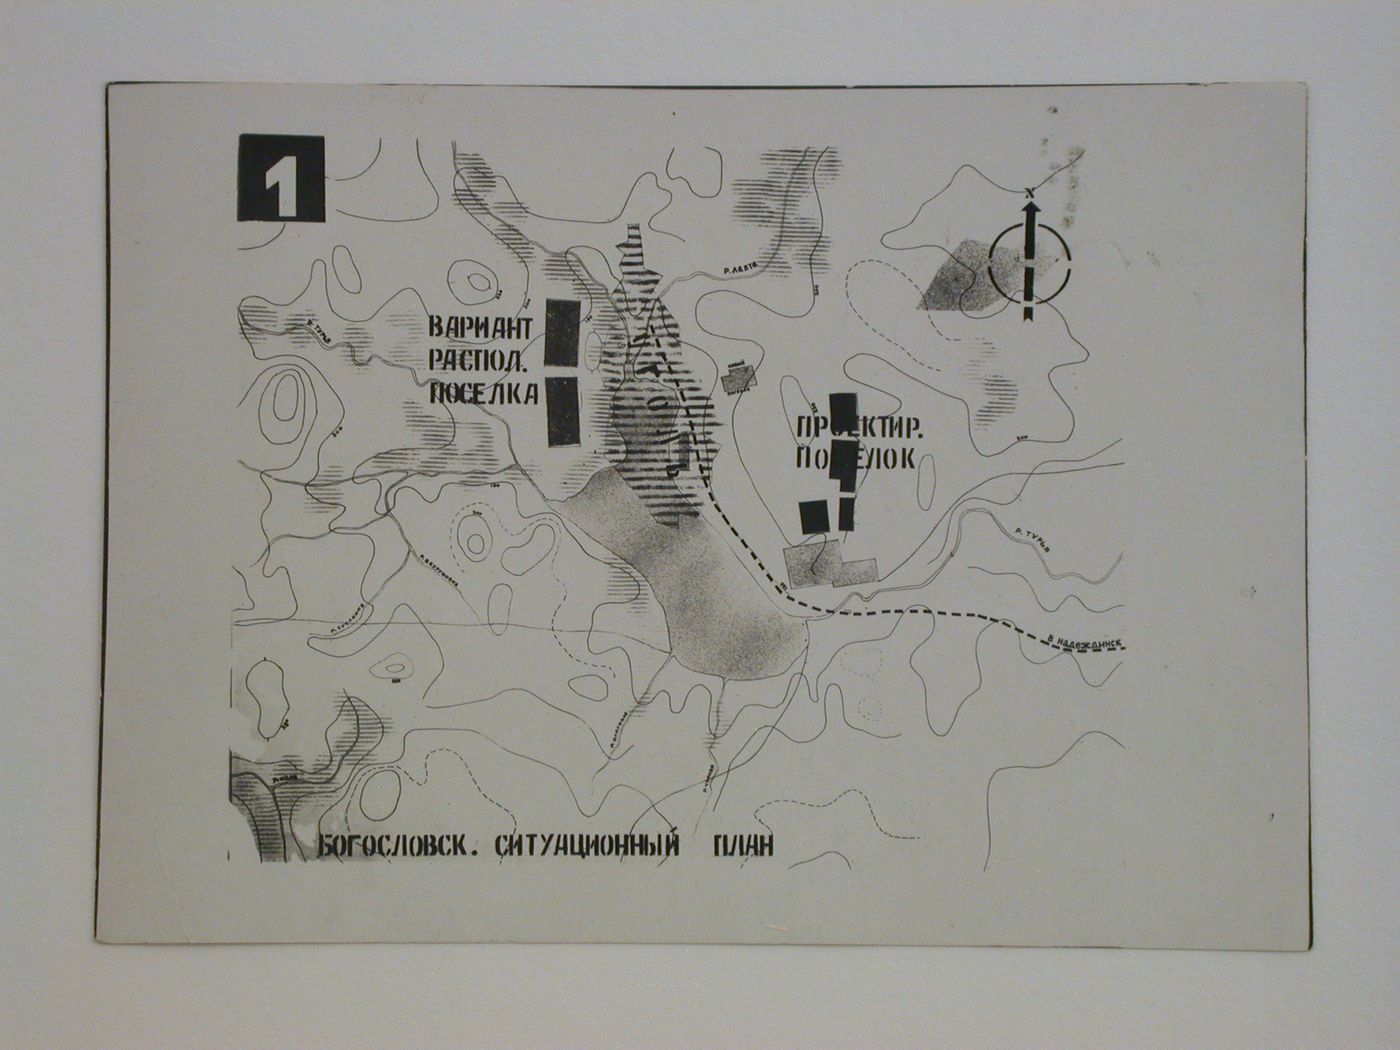 Photograph of a schematic site plan for industrial housing for a coal mining town, Bogoslovsk, Soviet Union (now in Russia)